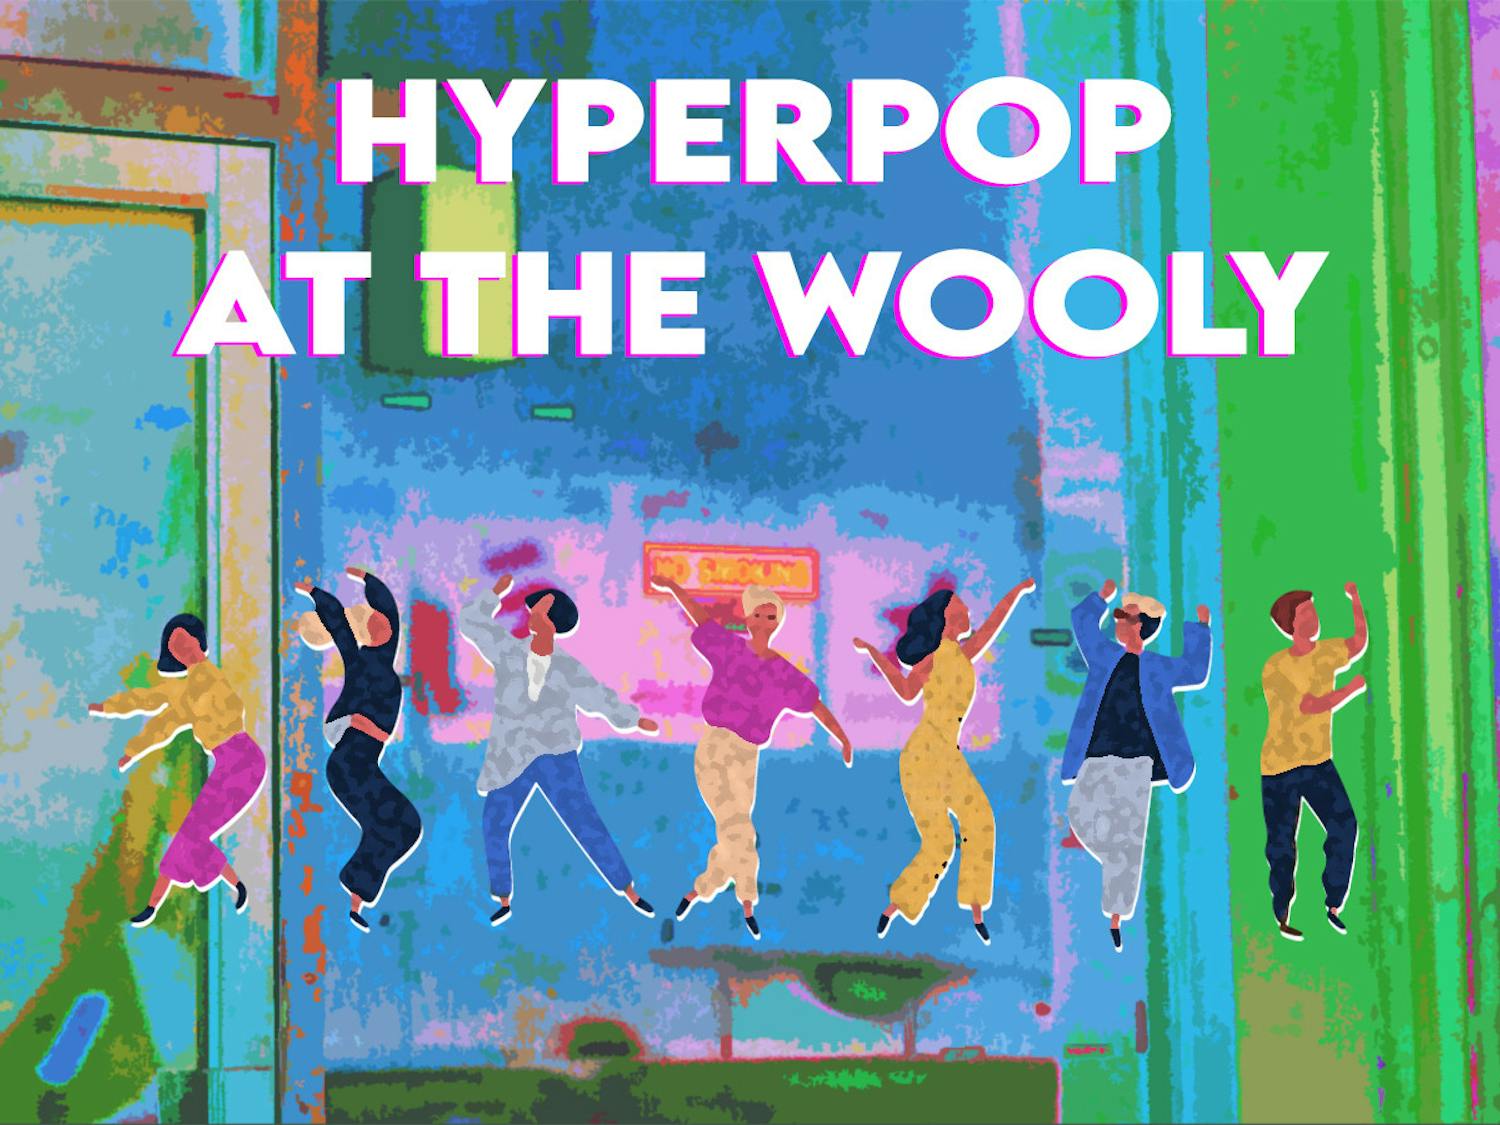 The hyperpop-themed night on Nov. 20 is The Wooly&#x27;s second, following a SOPHIE tribute night Oct. 15.